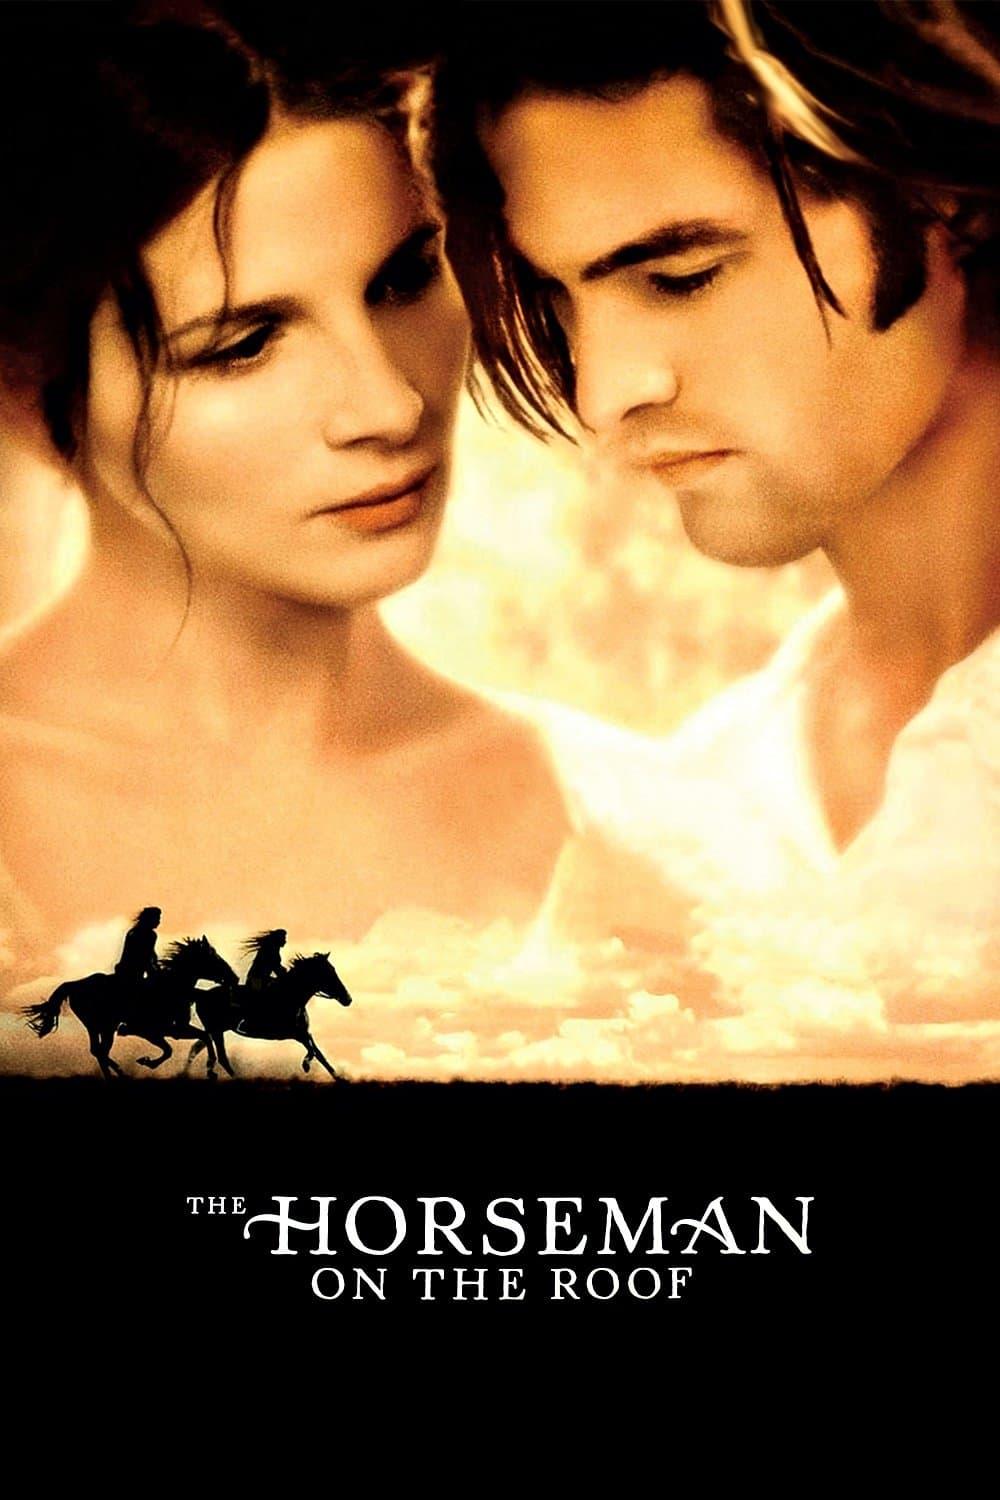 The Horseman on the Roof poster